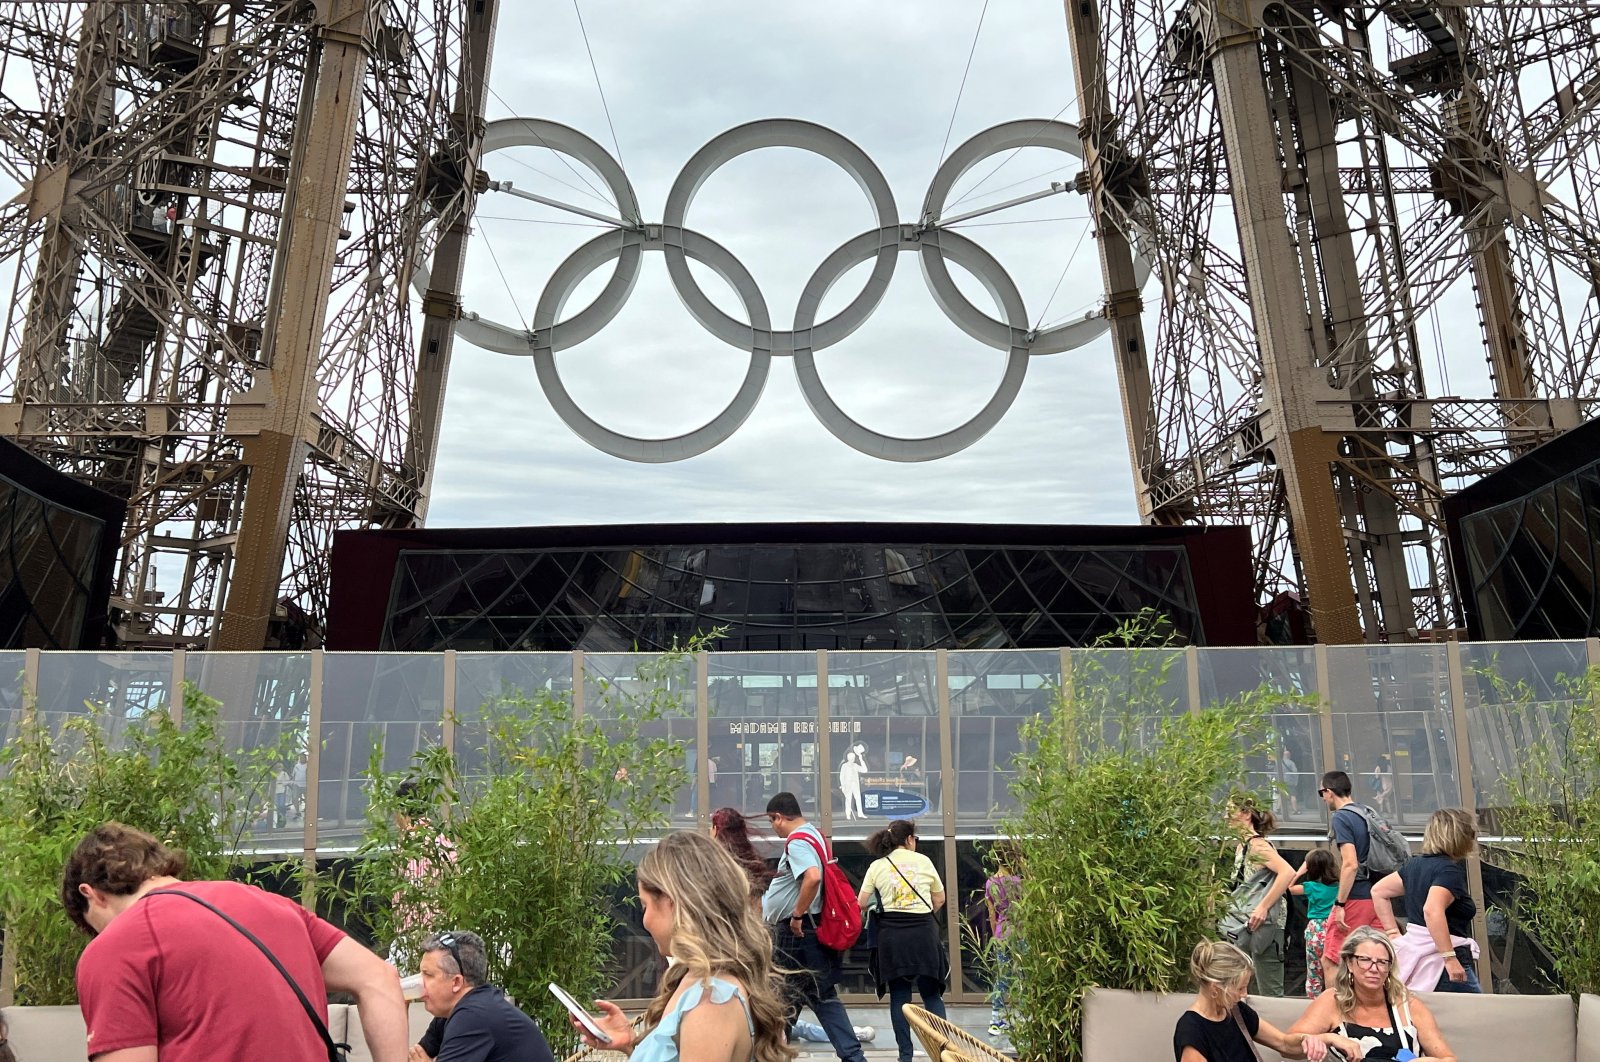 The Olympic rings are displayed on the Eiffel Tower for the Paris 2024 Olympic and Paralympic Games, Paris, France, June 29, 2024. (Reuters Photo)